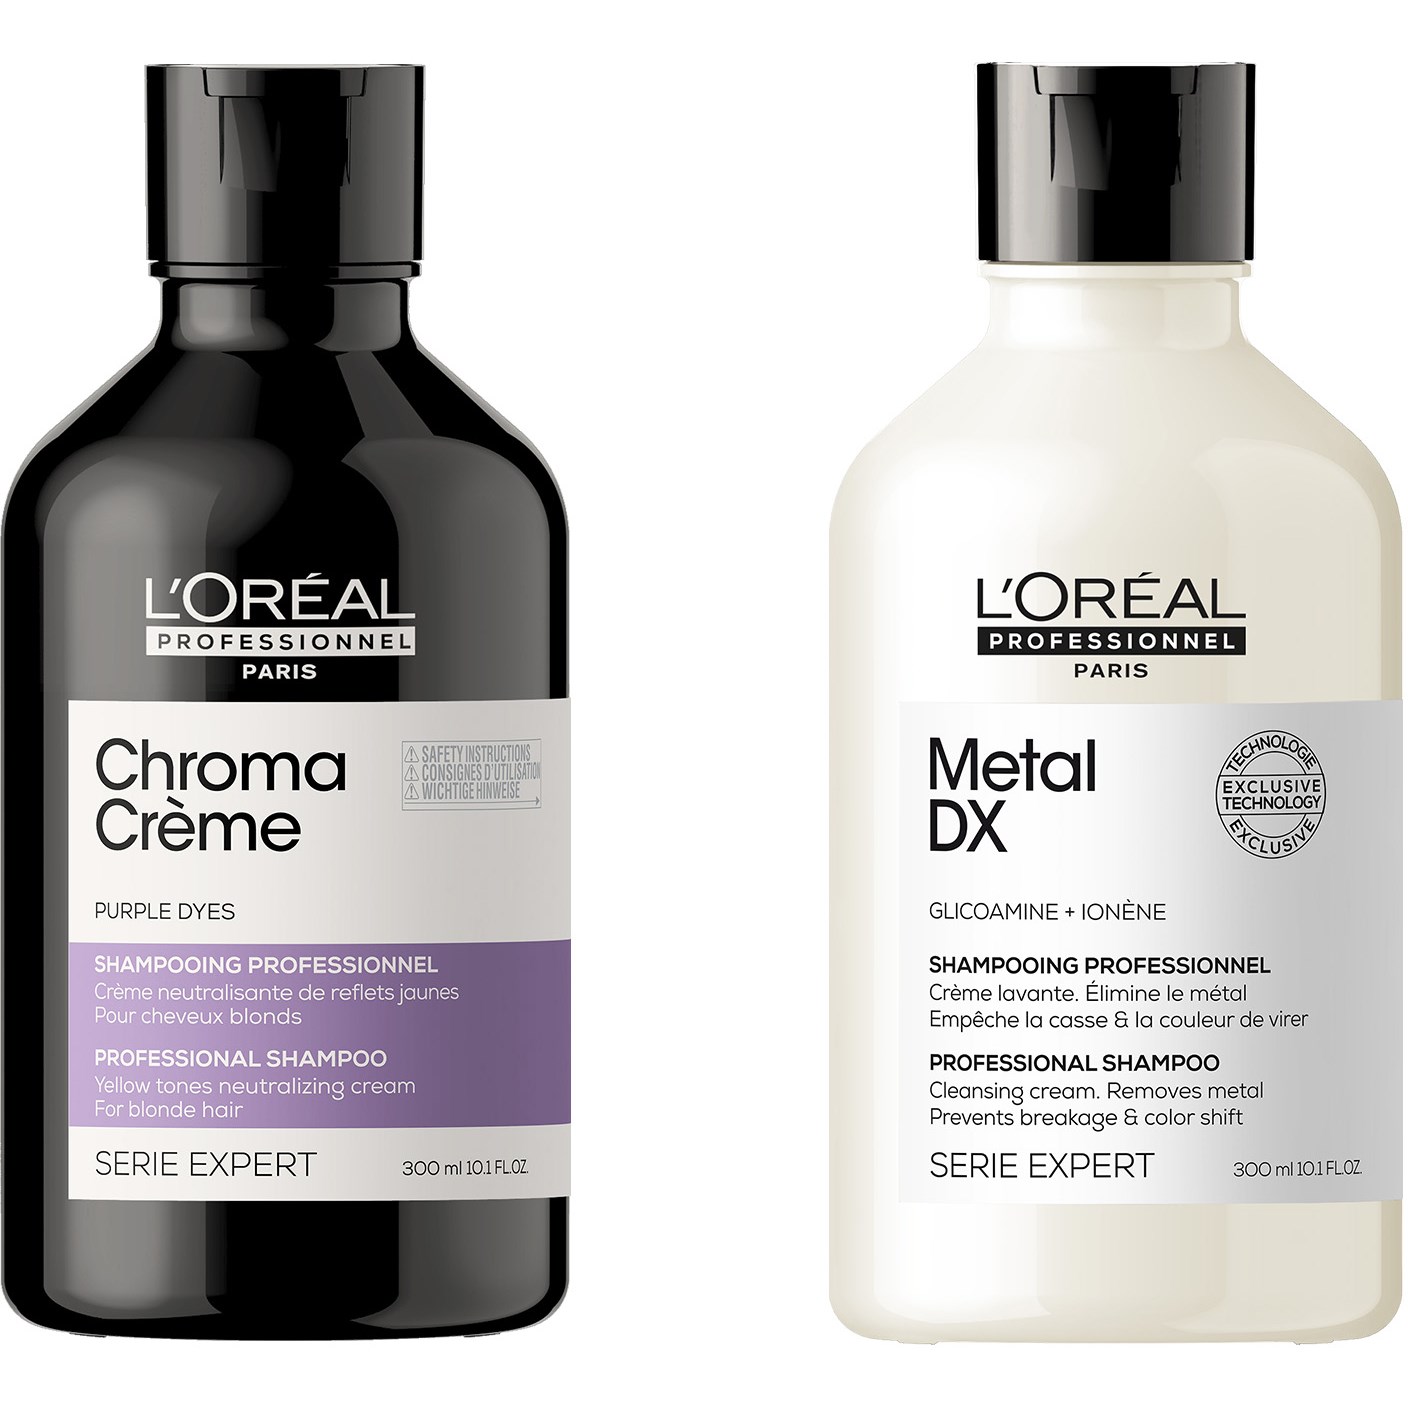 L'Oréal Professionnel Chroma Creme Routine for Colored Blonde Hair